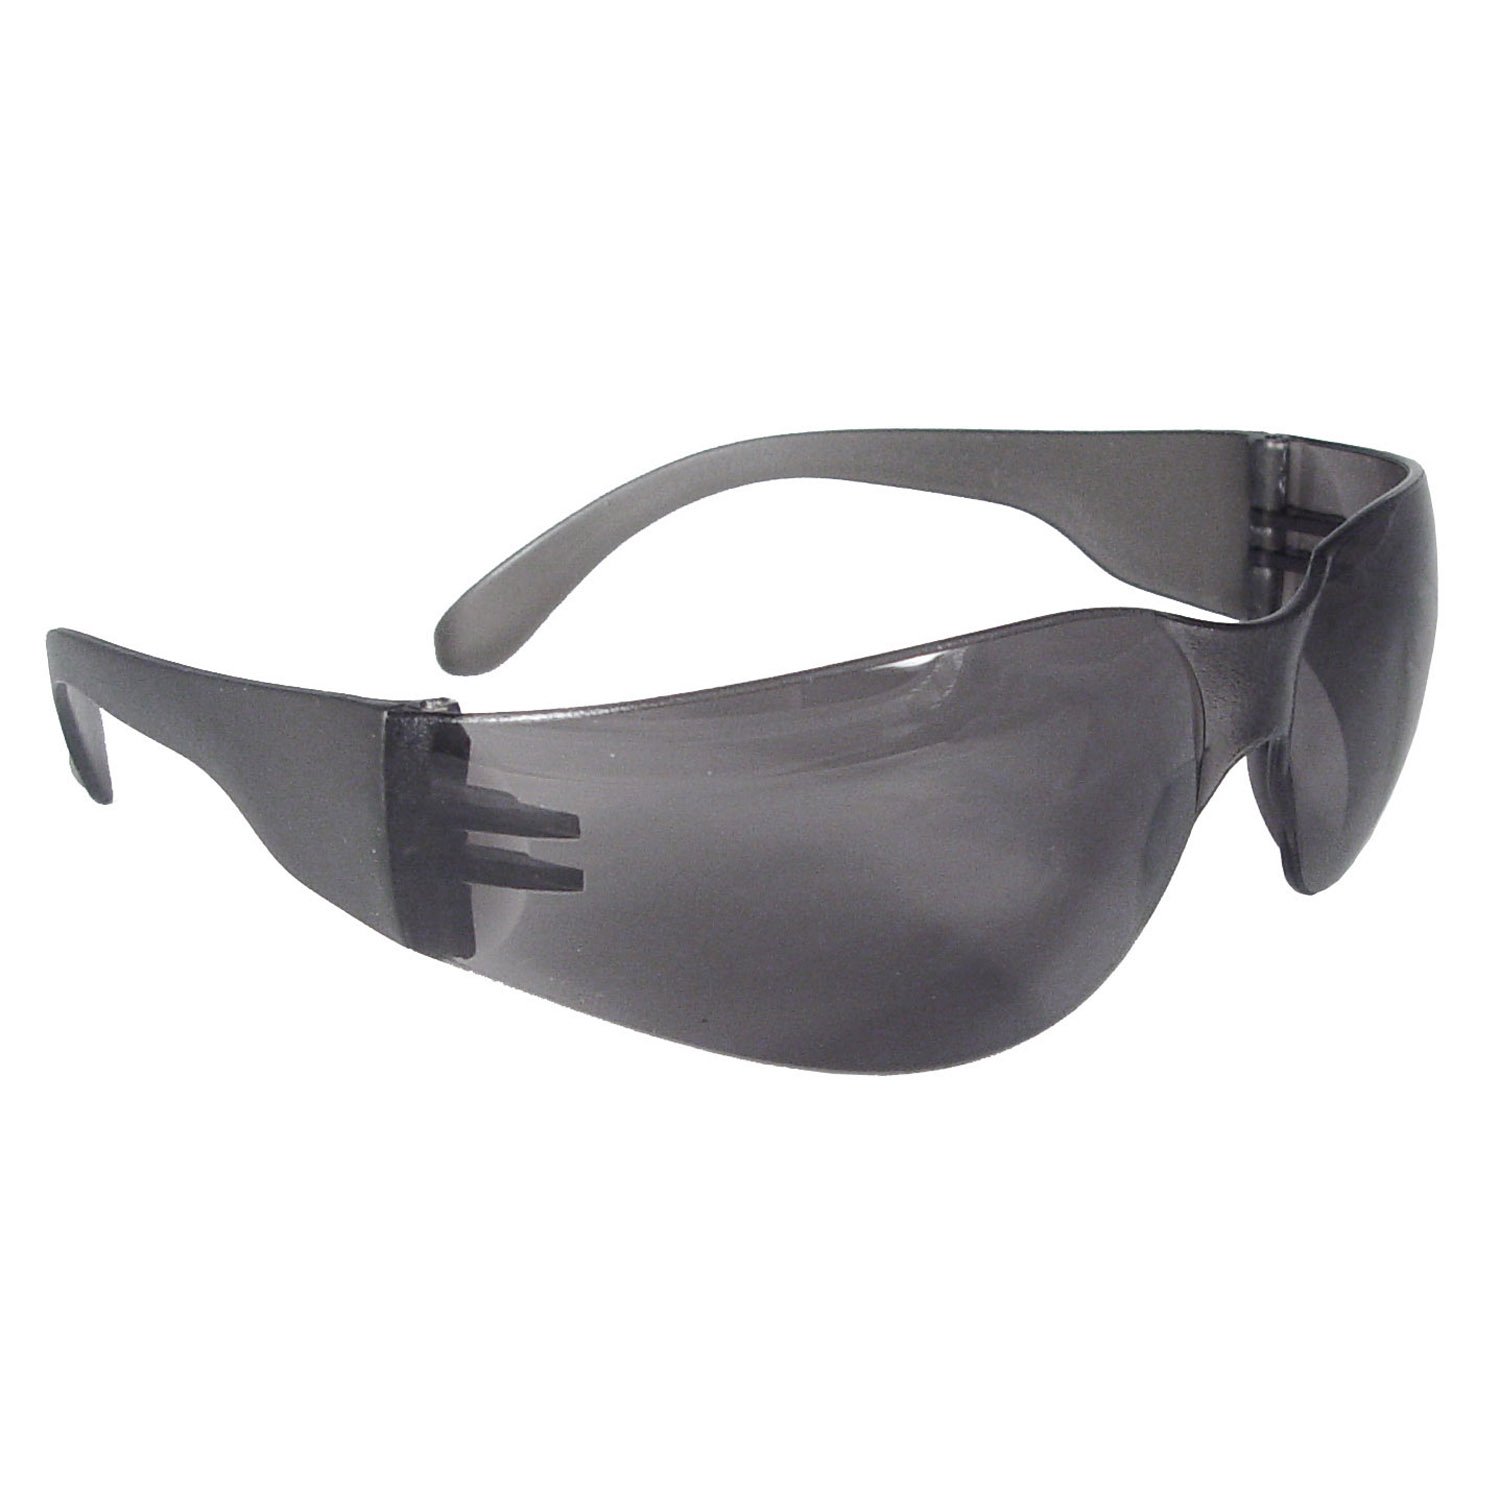 100 Series Safety Glasses